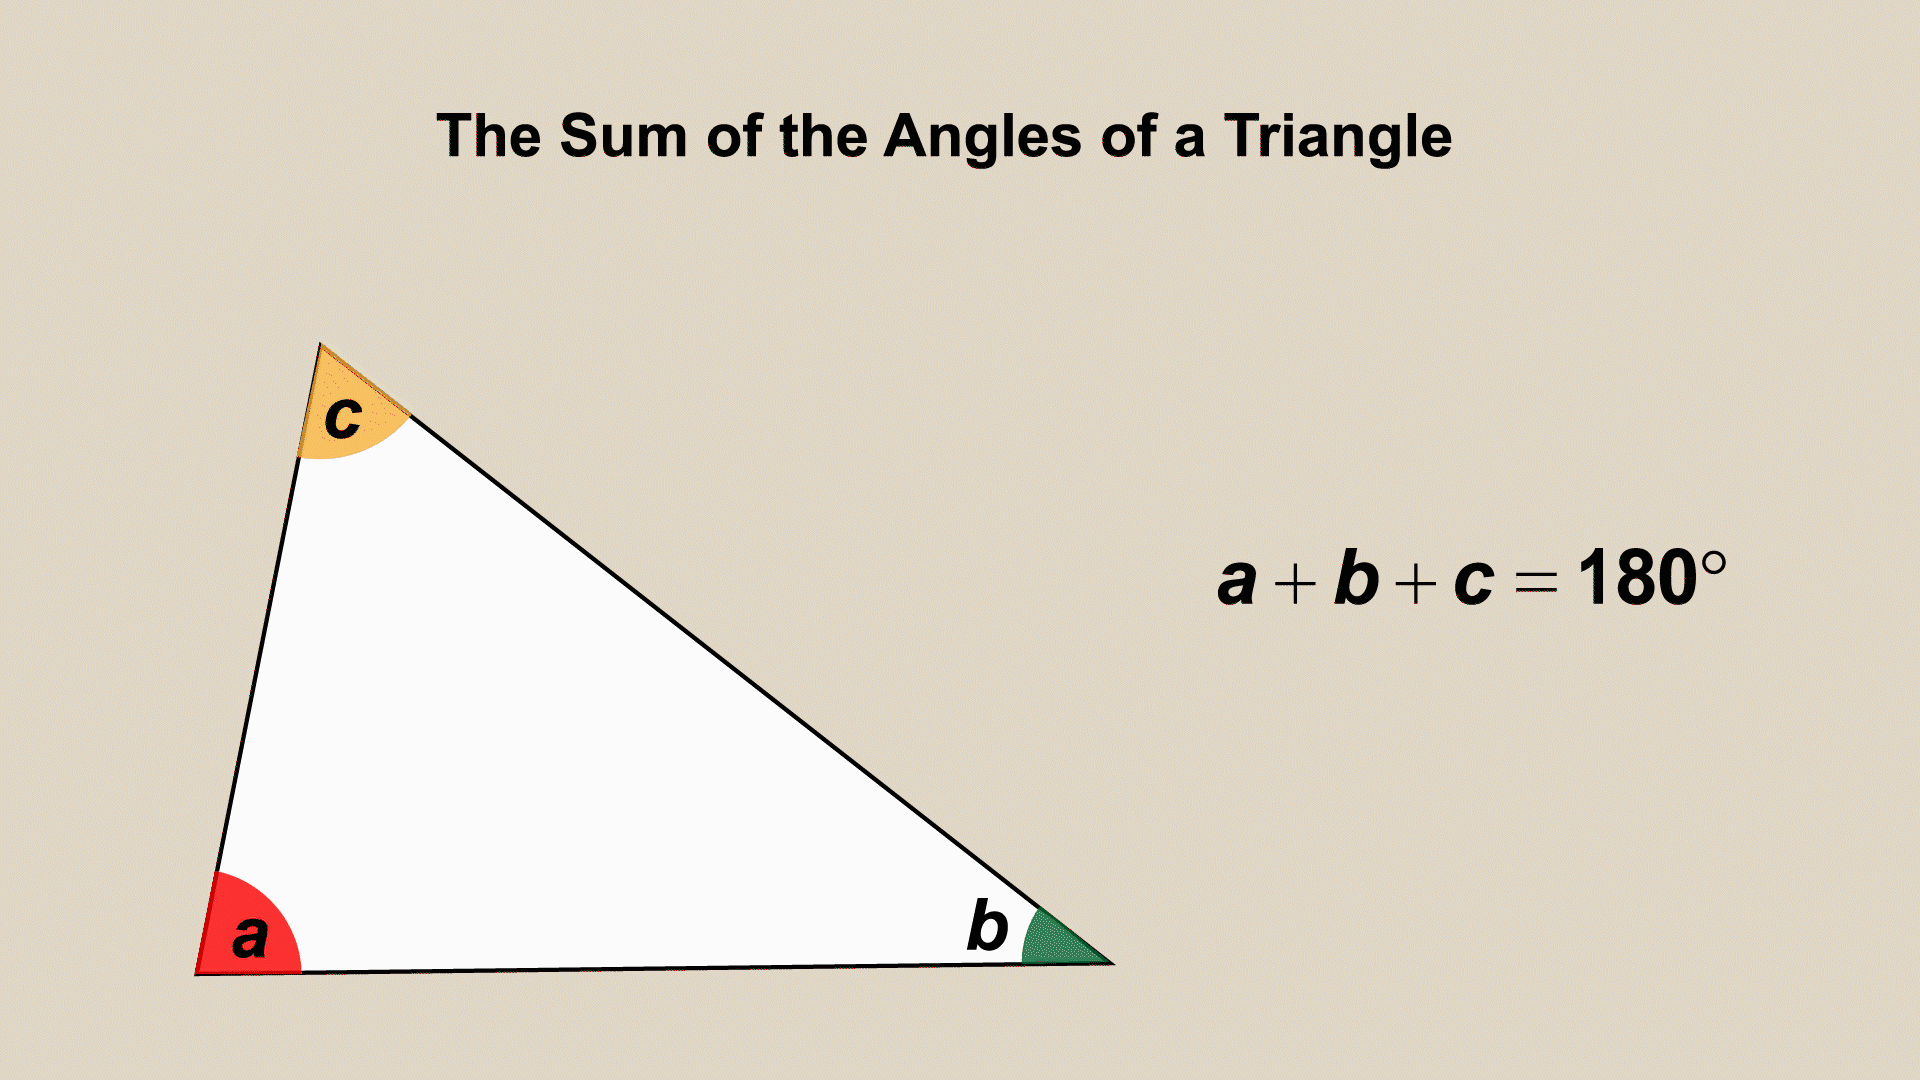 This is an animated piece of clip art that shows how the sum of the angles of a triangle equal 180°.